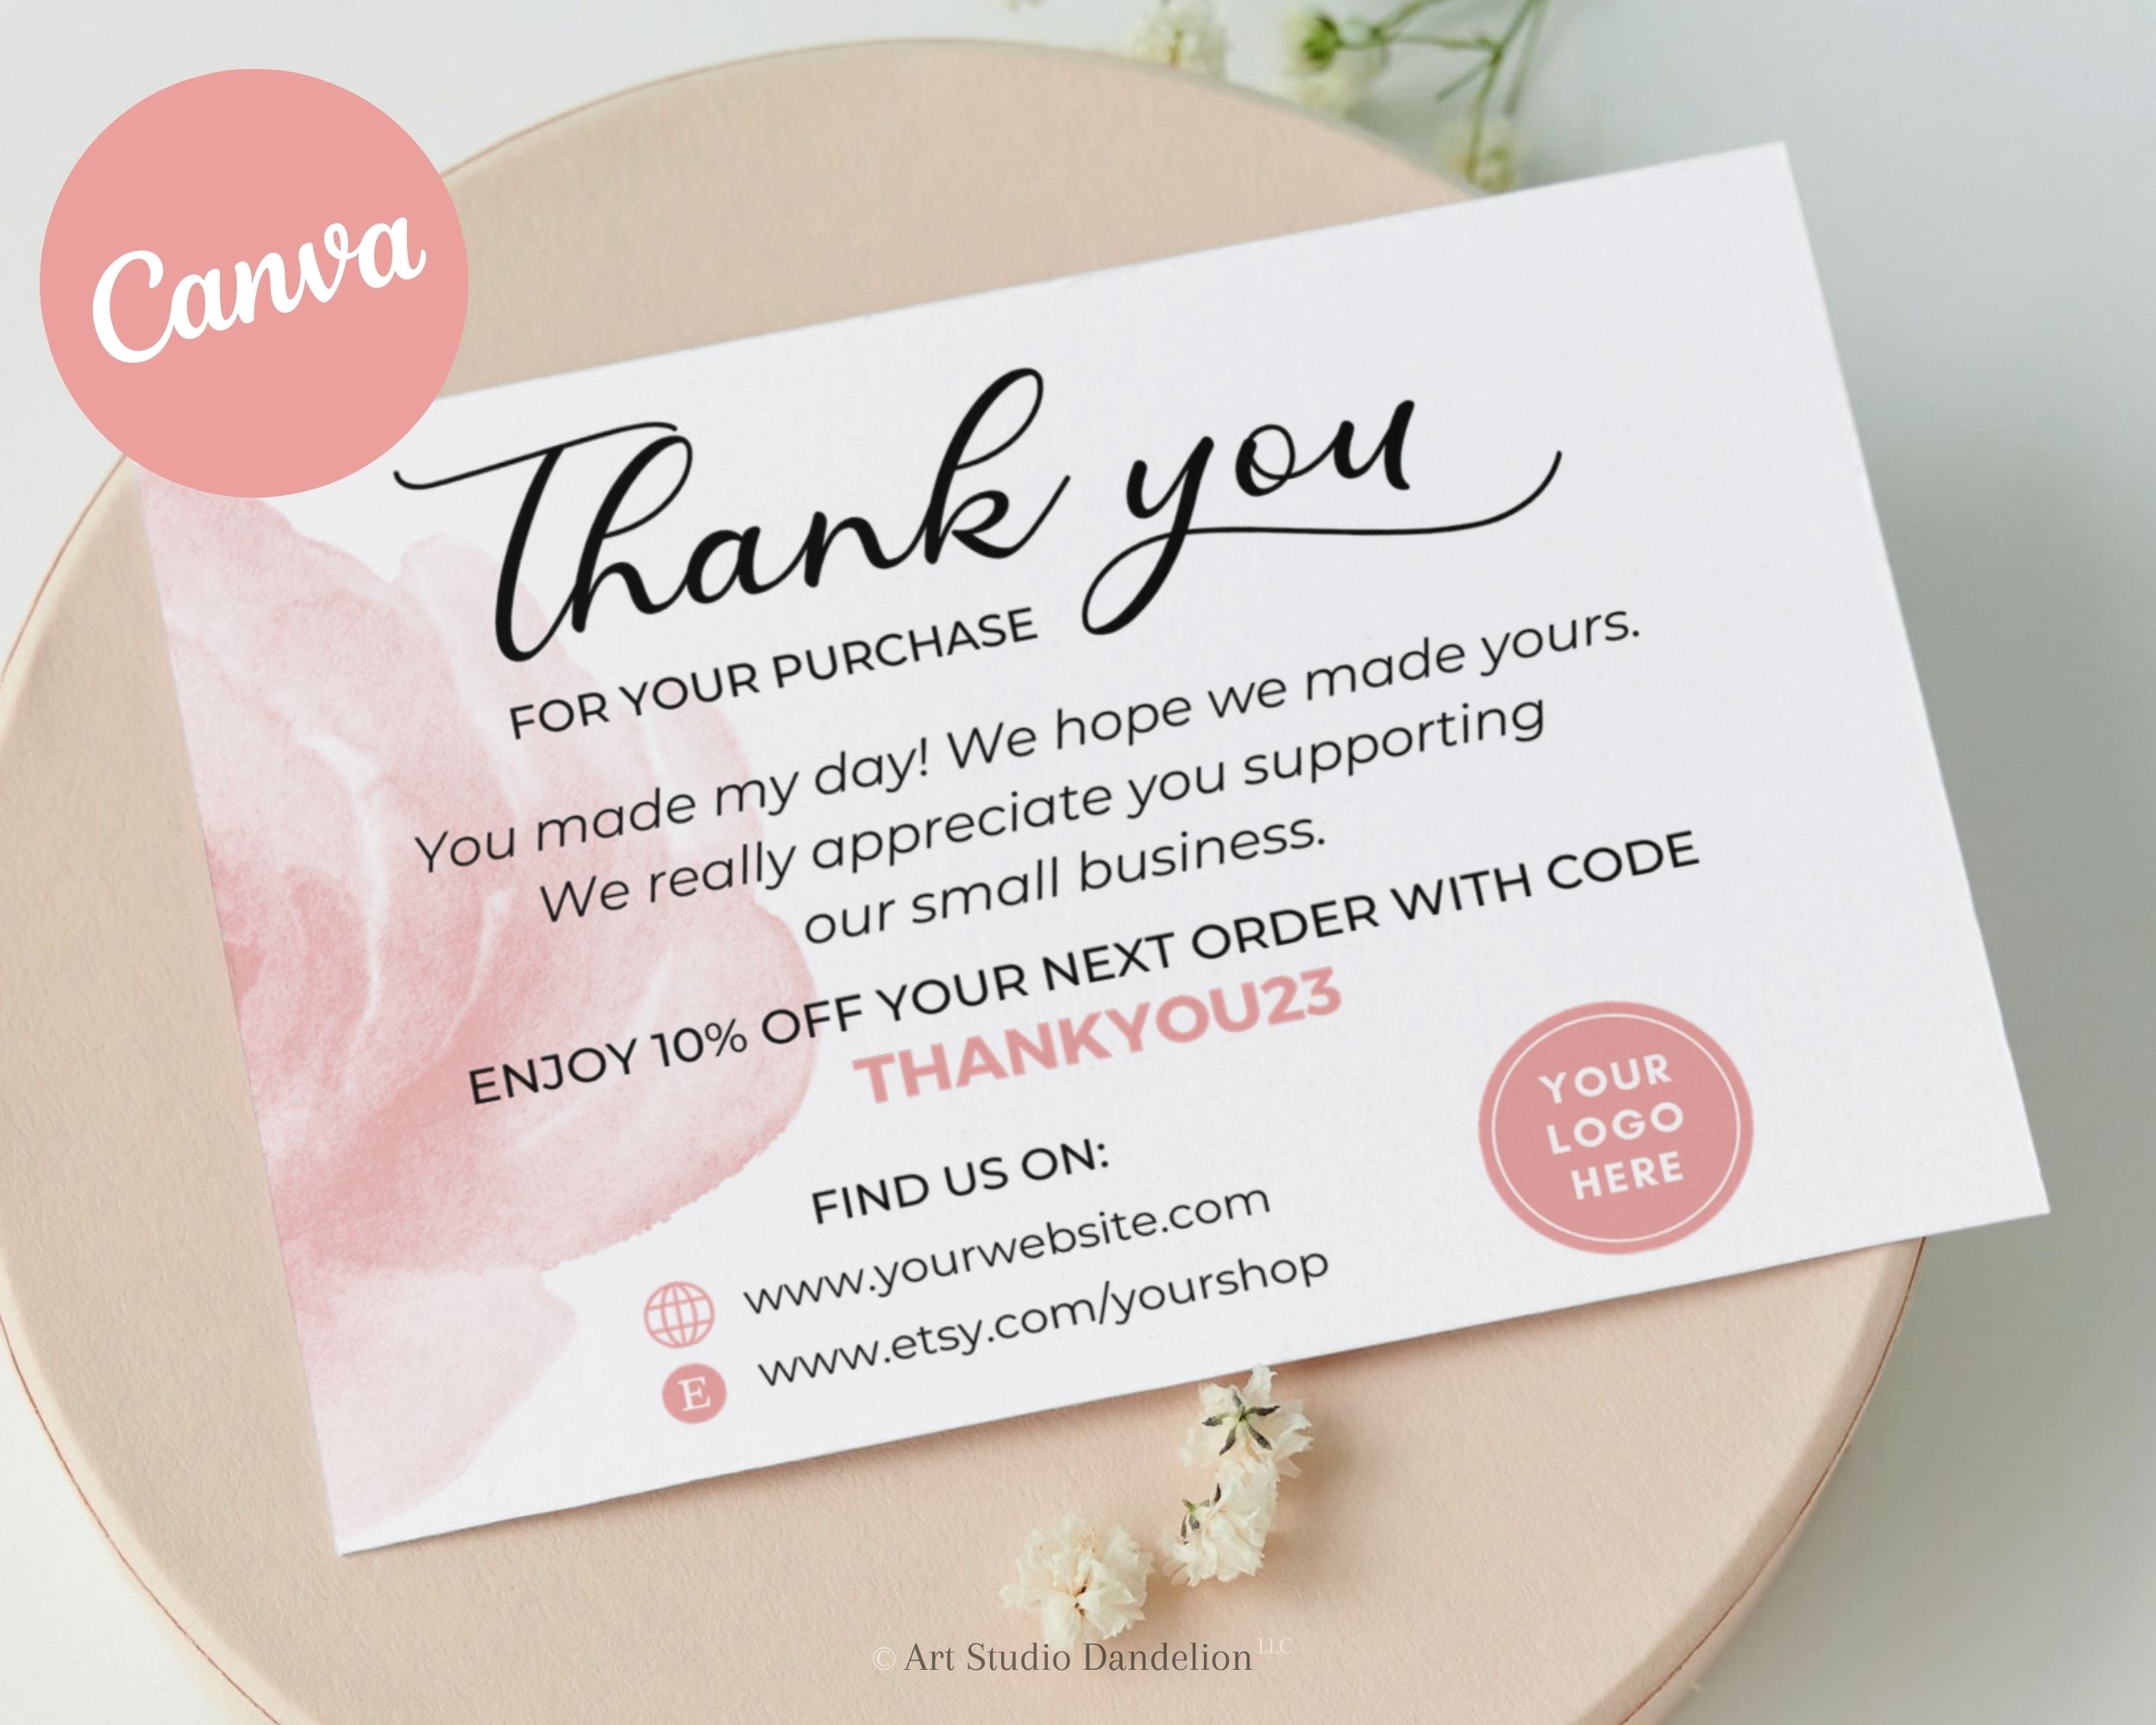 Thank You for your Purchase Card Template. Etsy Small Business Fully Editable Thank You Card Template - Instant Access - Print Ready